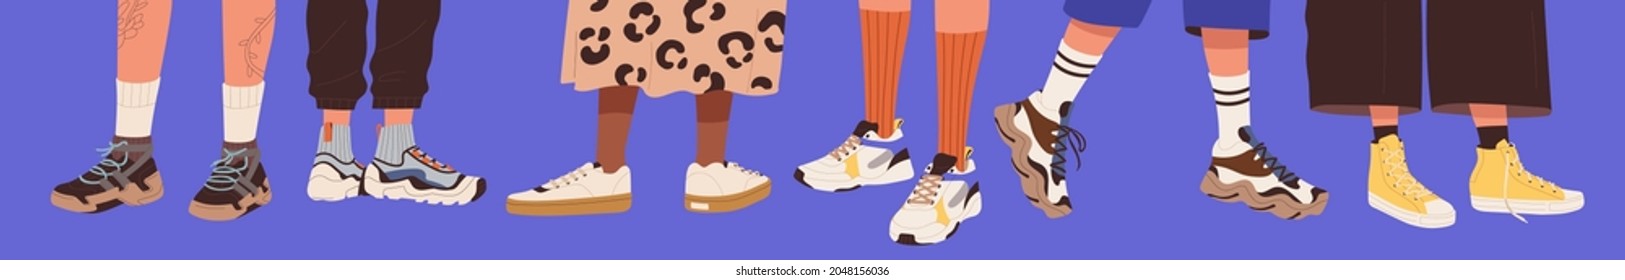 Legs wearing fashion sneakers. Feet in modern sports footwear. Trendy comfortable sportswear for active lifestyle. Stylish male and female models of athletic shoes. Colored flat vector illustration